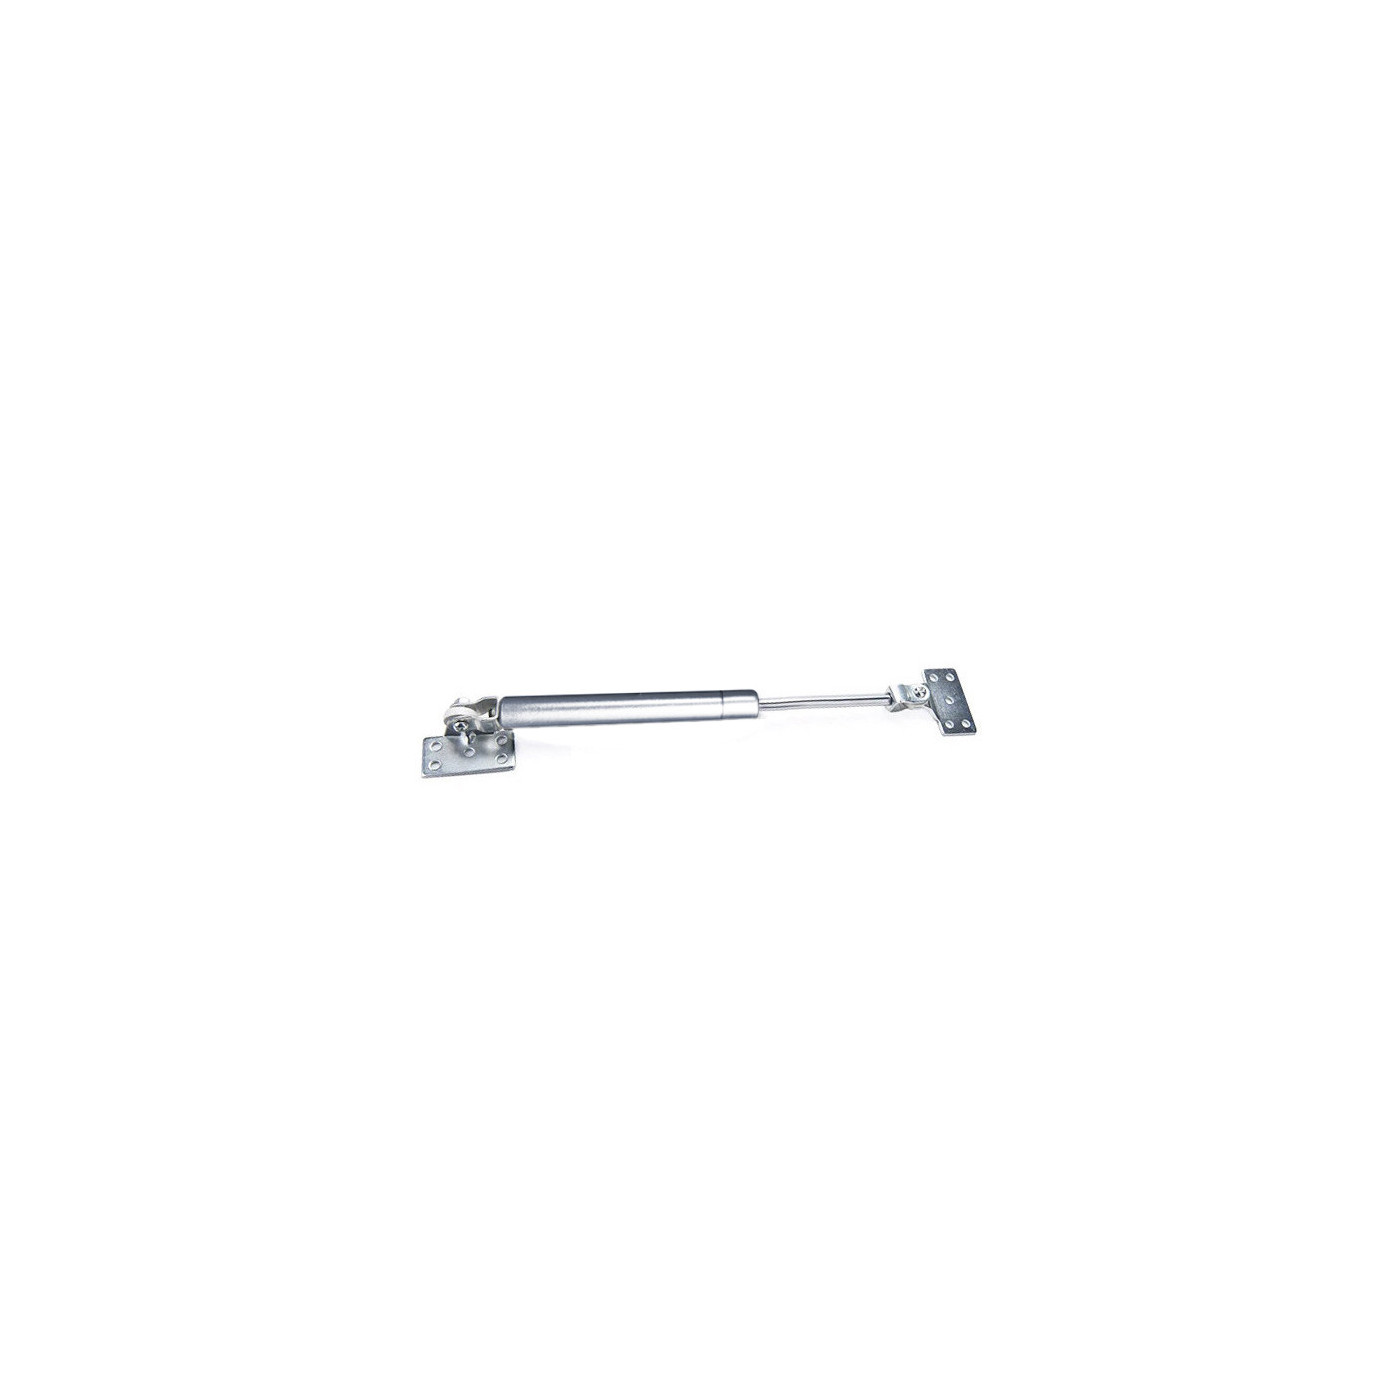 Universal gas spring with brackets (200N/20kg, 258 mm, silver)